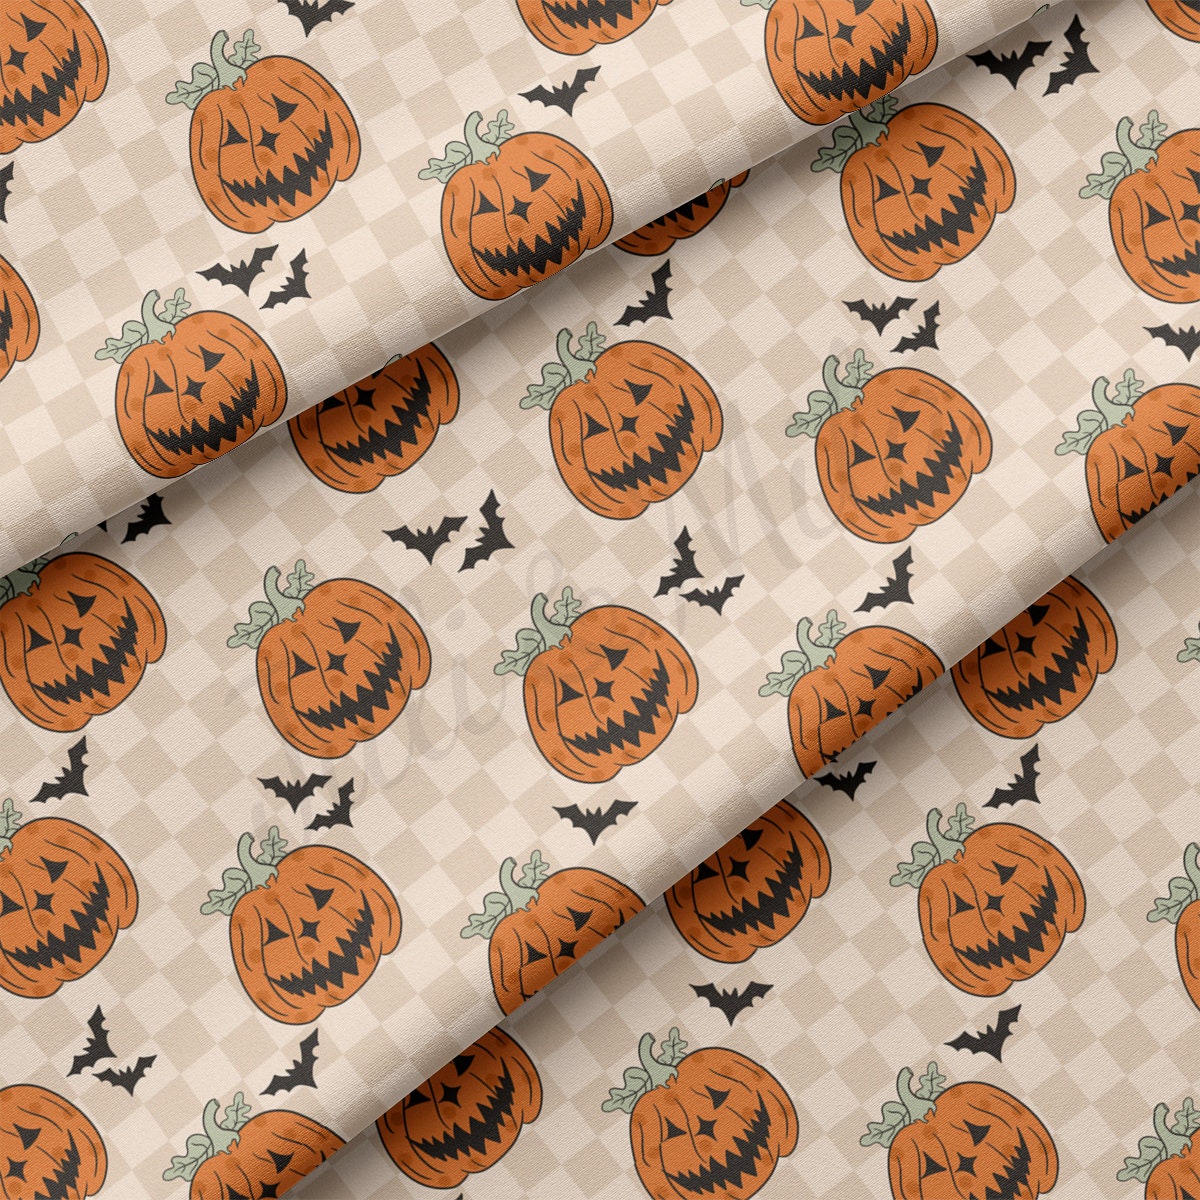 DBP Fabric Double Brushed Polyester Fabric DBP1878 halloween